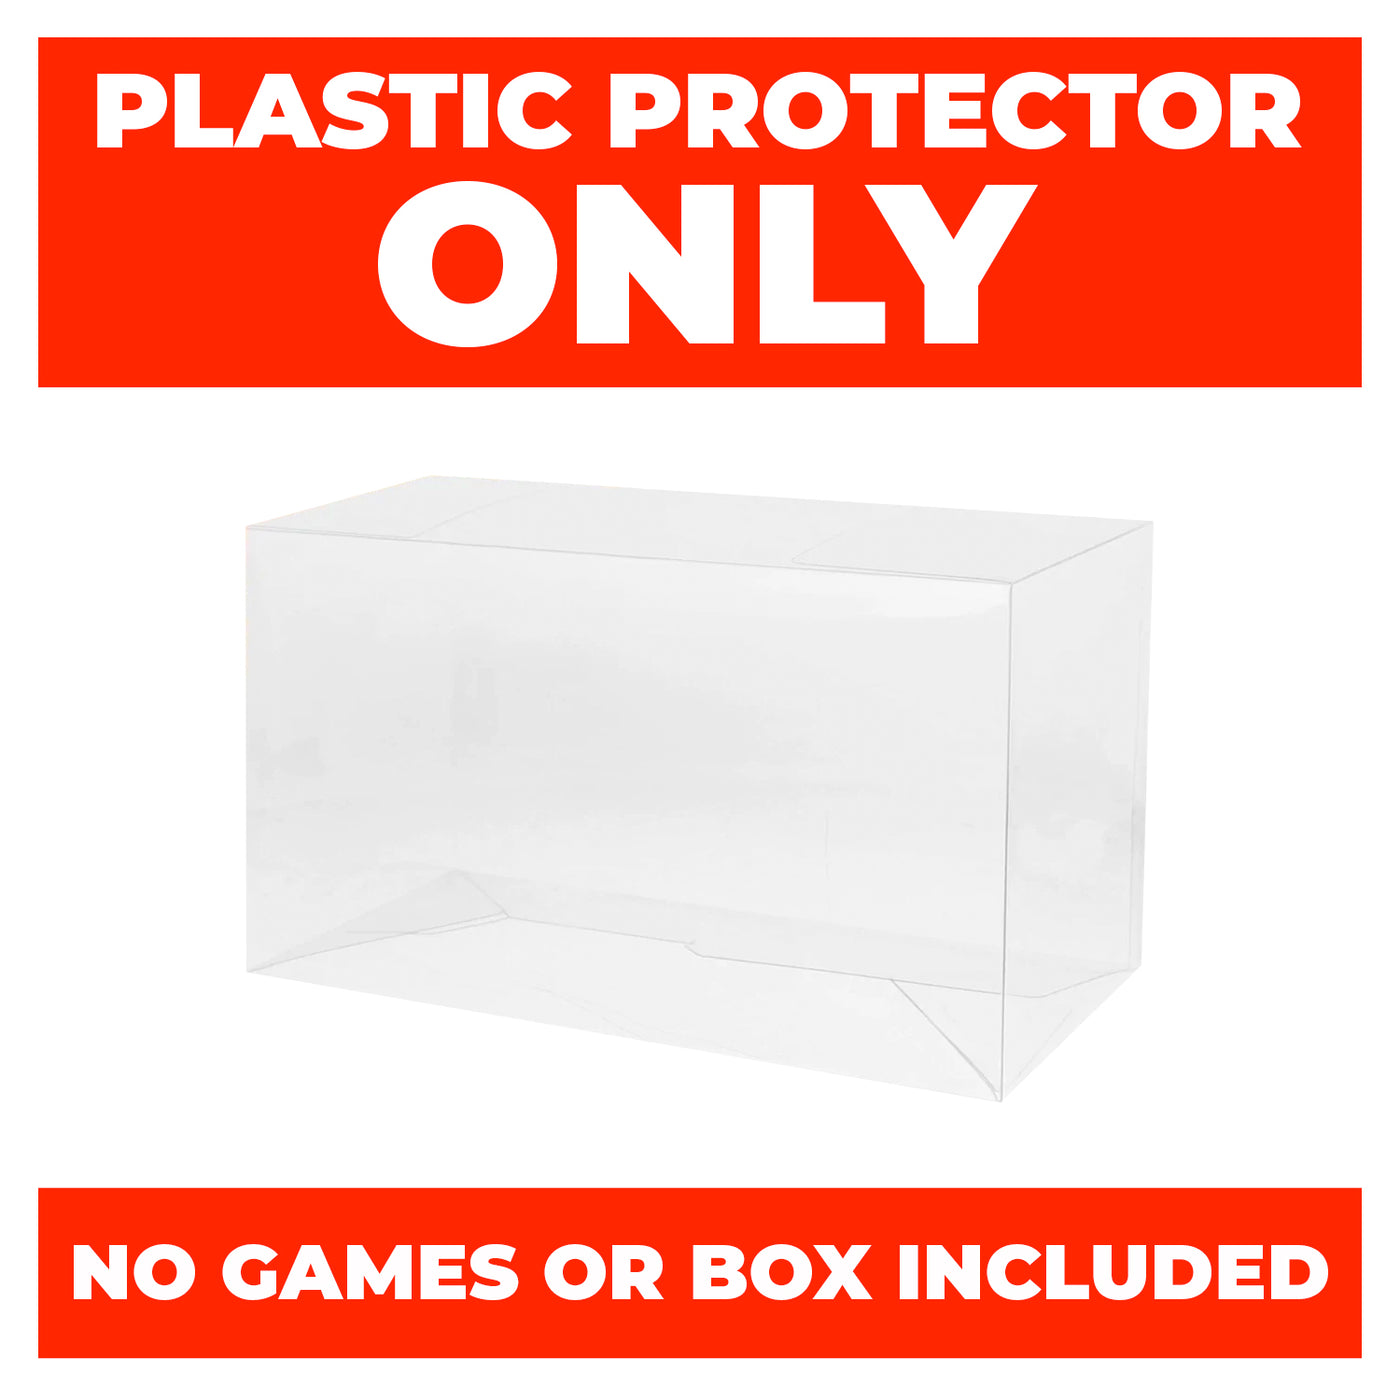 Plastic Protector for NINTENDO 2DS Video Game Console Box 0.50mm thick, UV & Scratch Resistant on The Pop Protector Guide by Display Geek